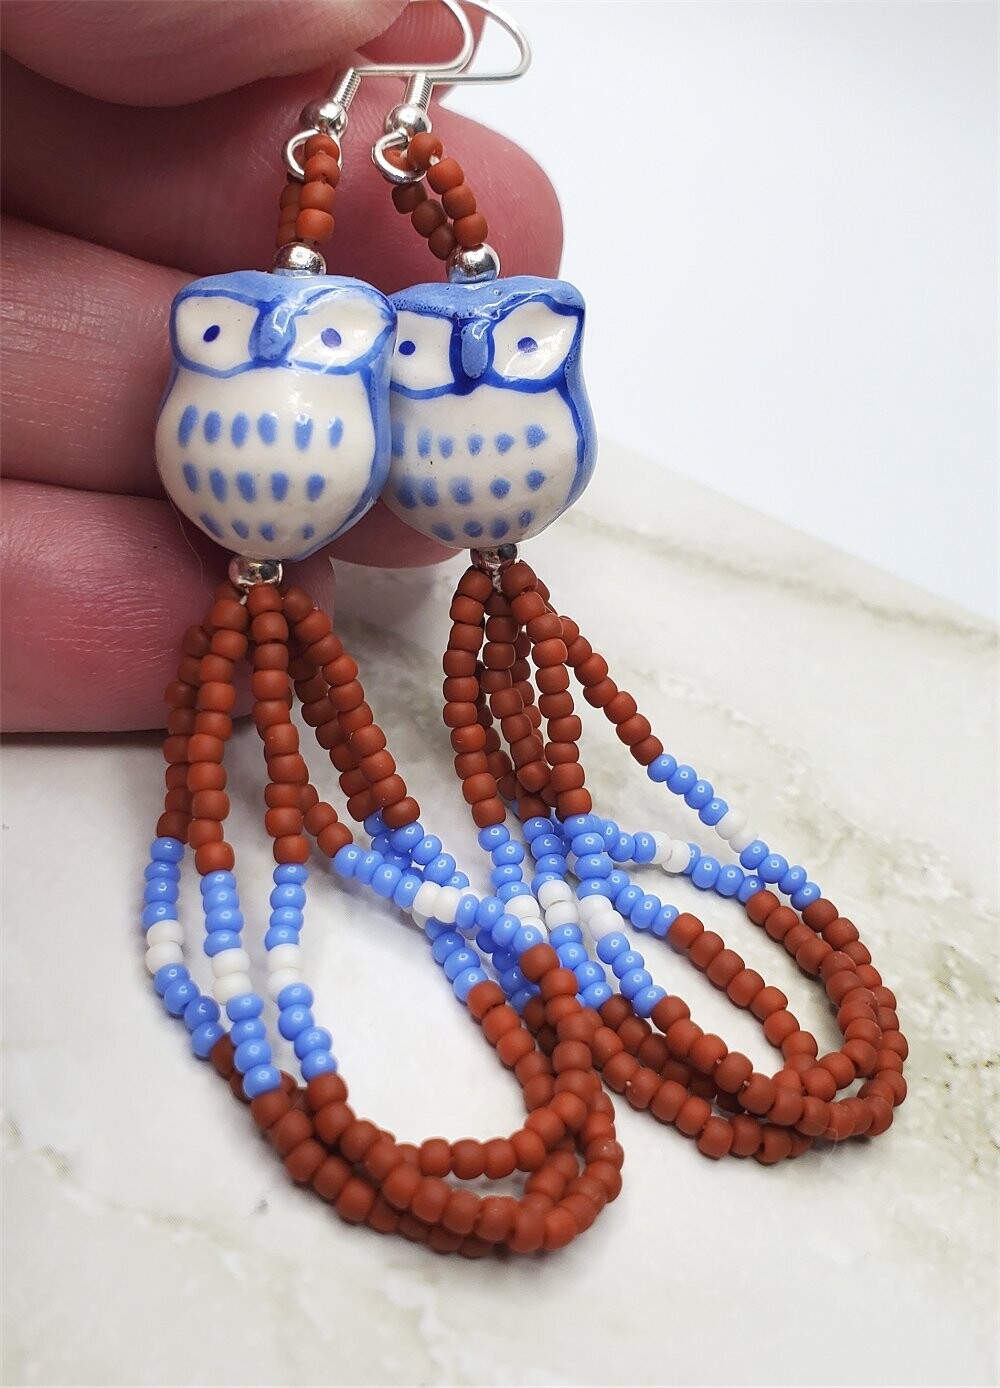 Blue and White Glass Owl Earrings with Terracotta, Periwinkle, and White Seed Beads